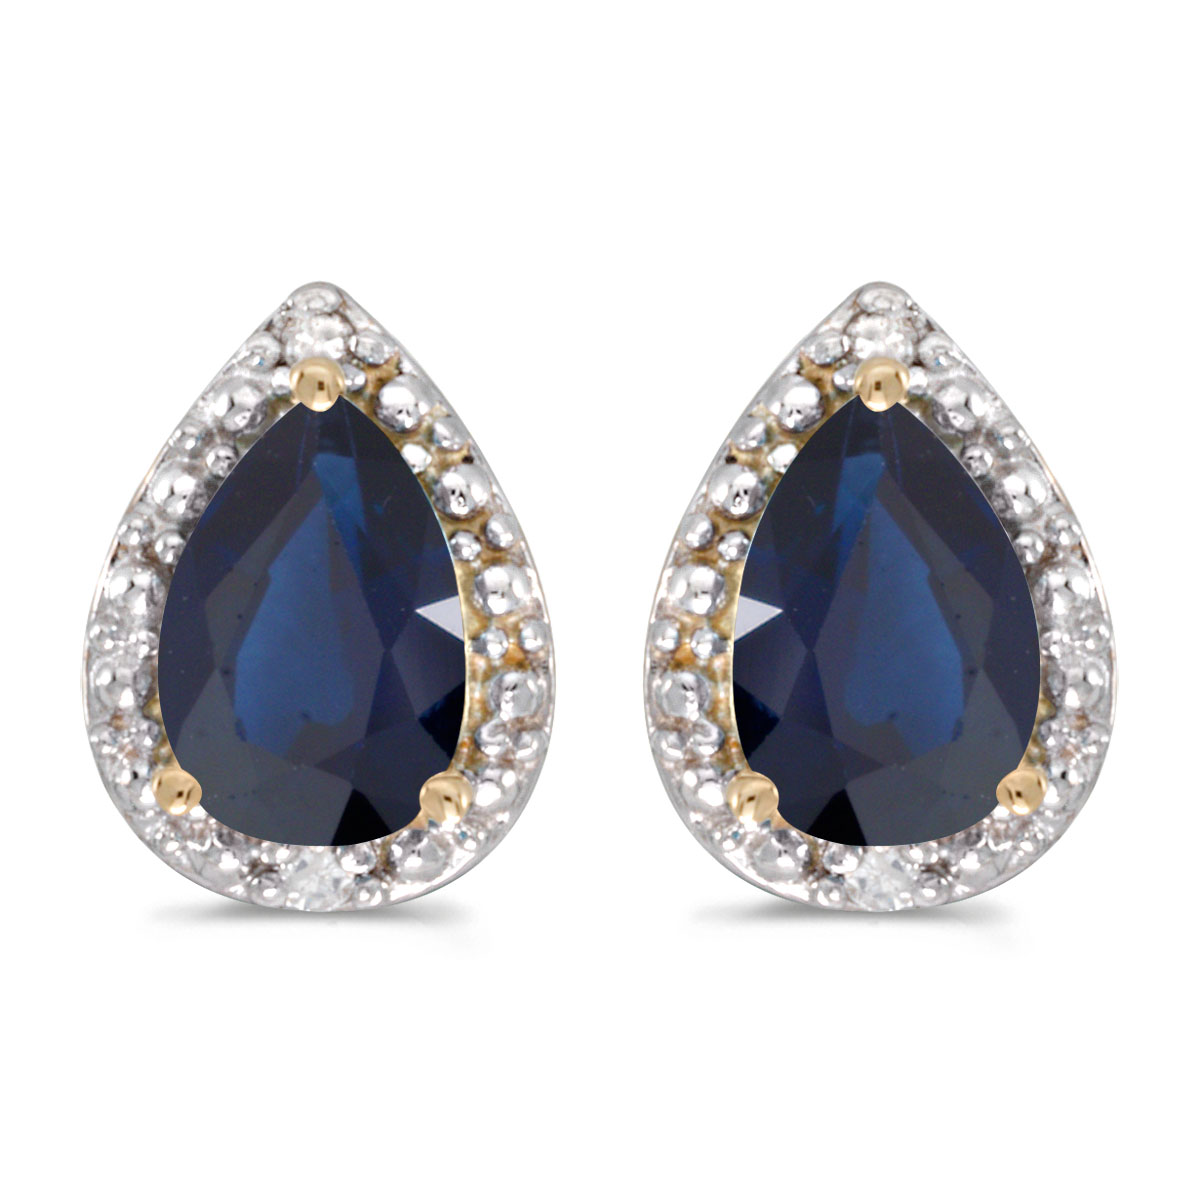 These 14k yellow gold pear sapphire and diamond earrings feature 6x4 mm genuine natural sapphires with a 1.26 ct total weight and sparkling diamond accents.